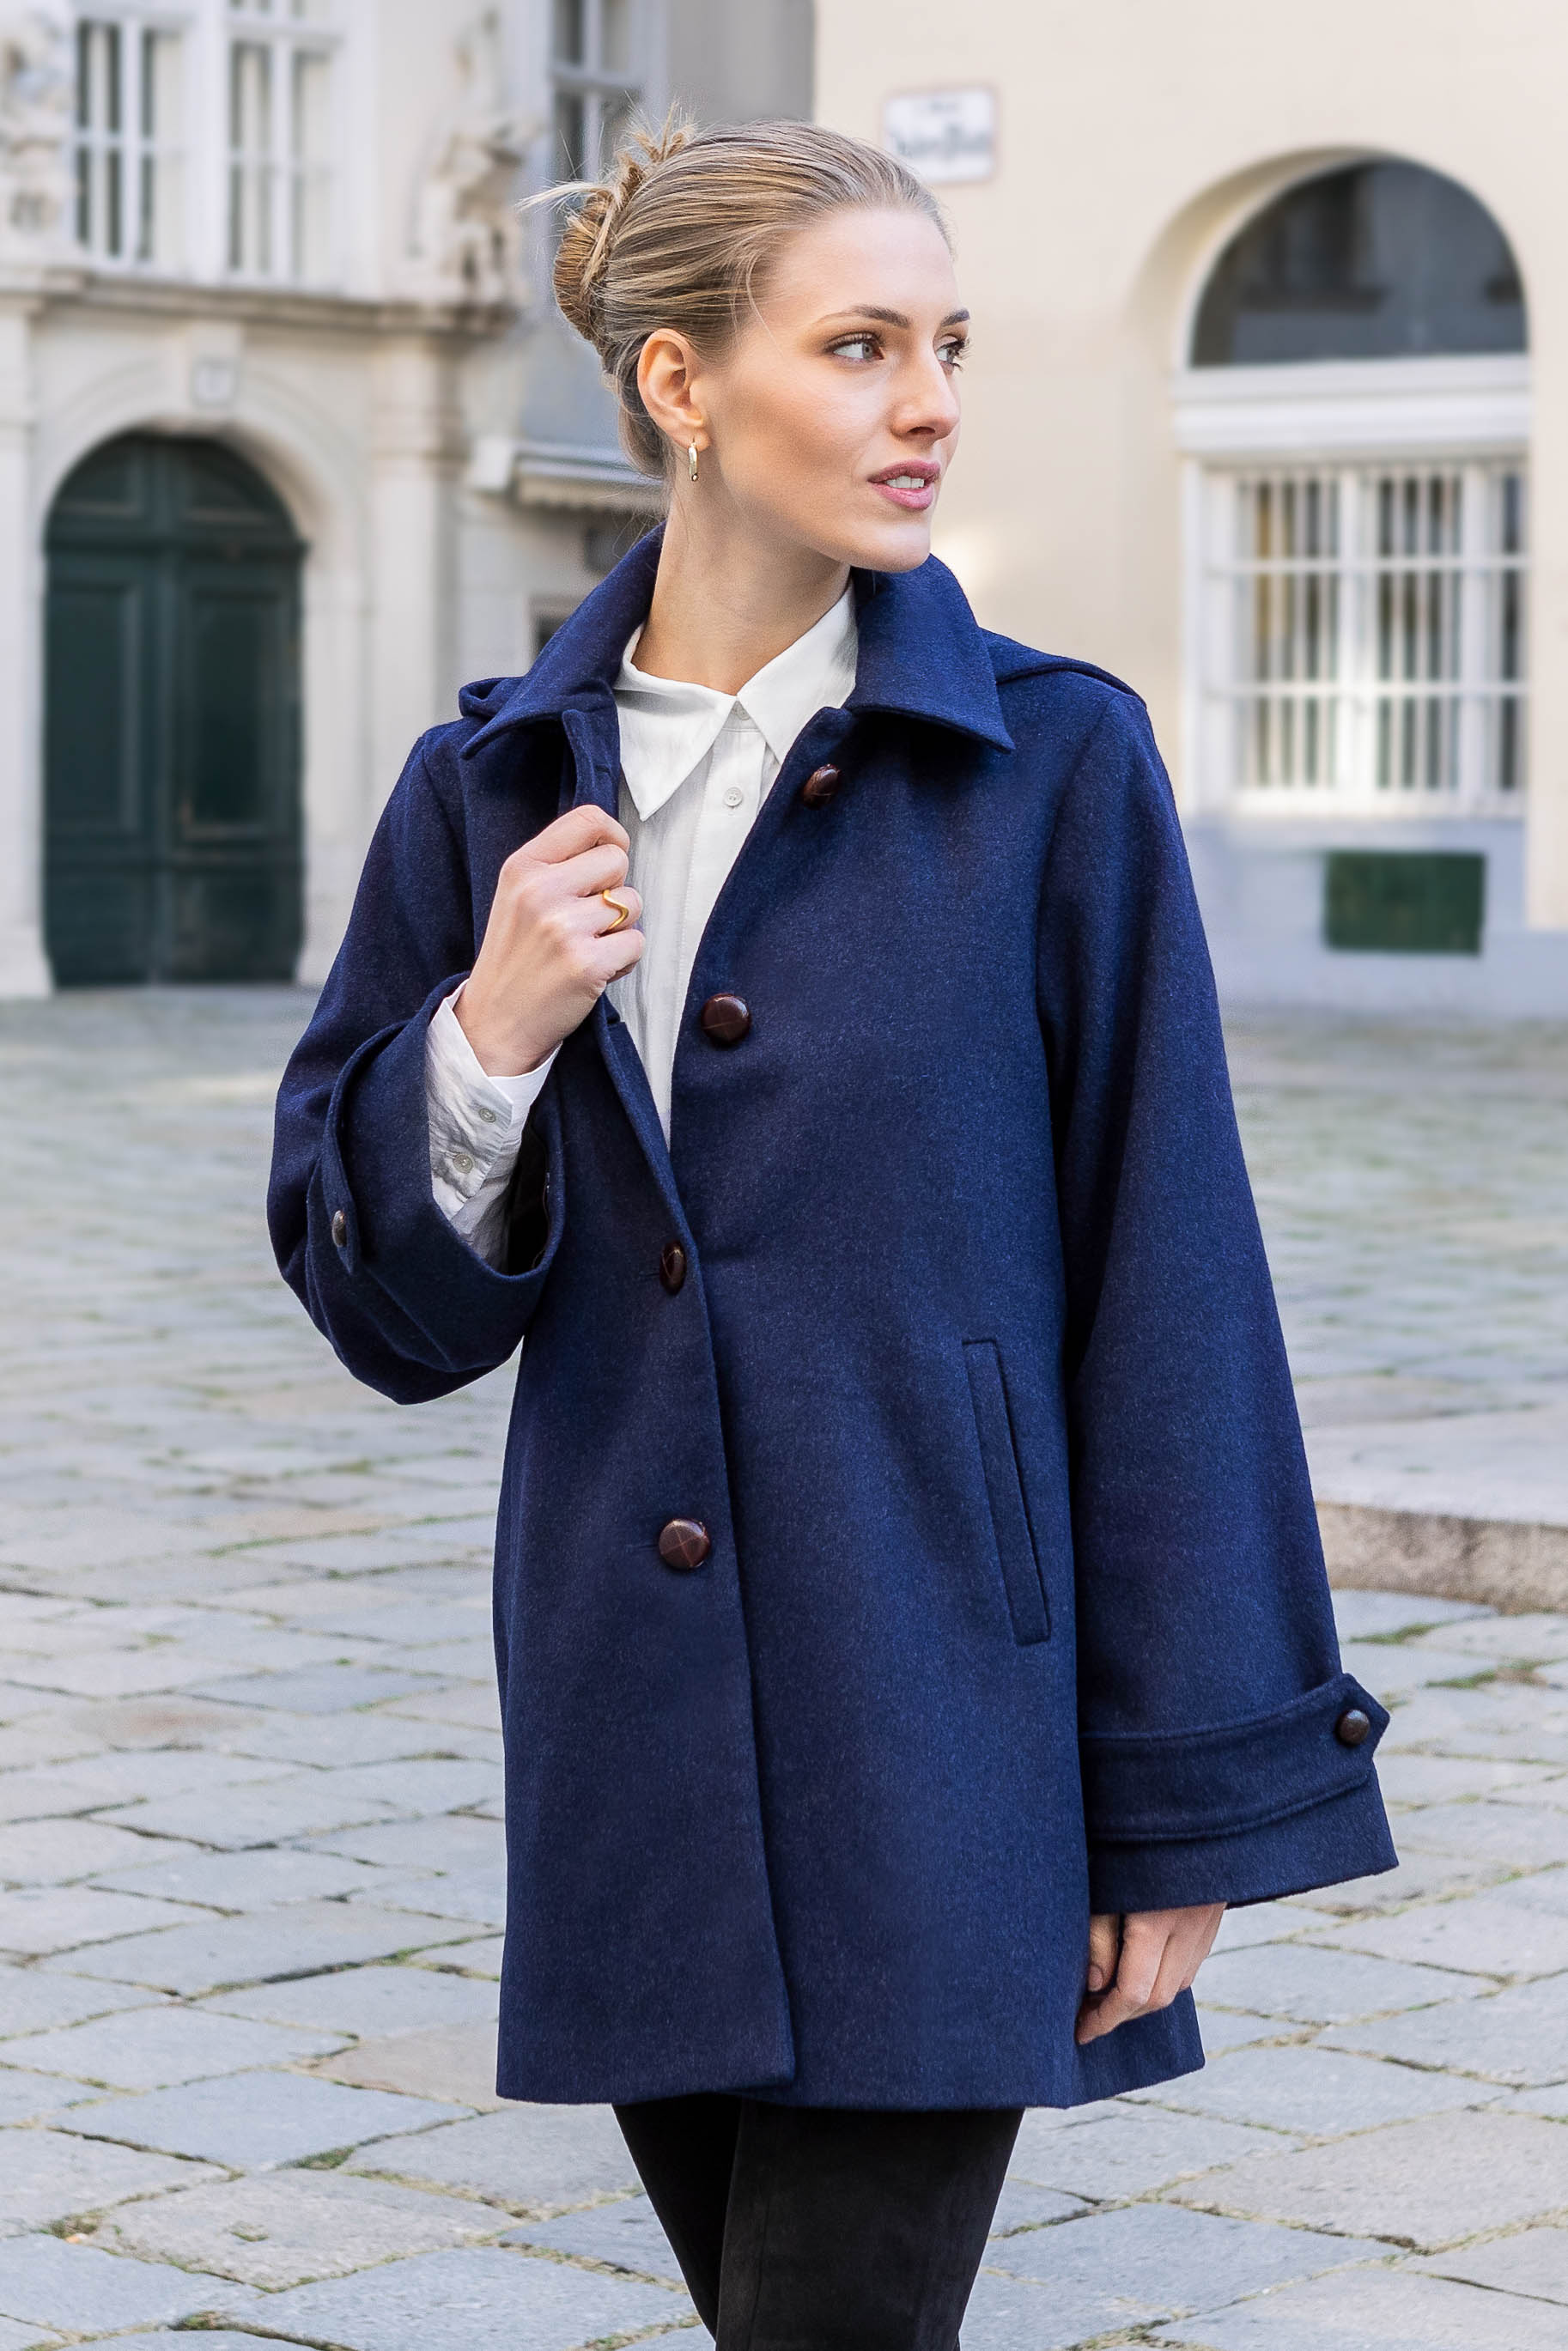 Winter Wardrobe Revival: The Stylish and Cost-Effective Jacket Liner